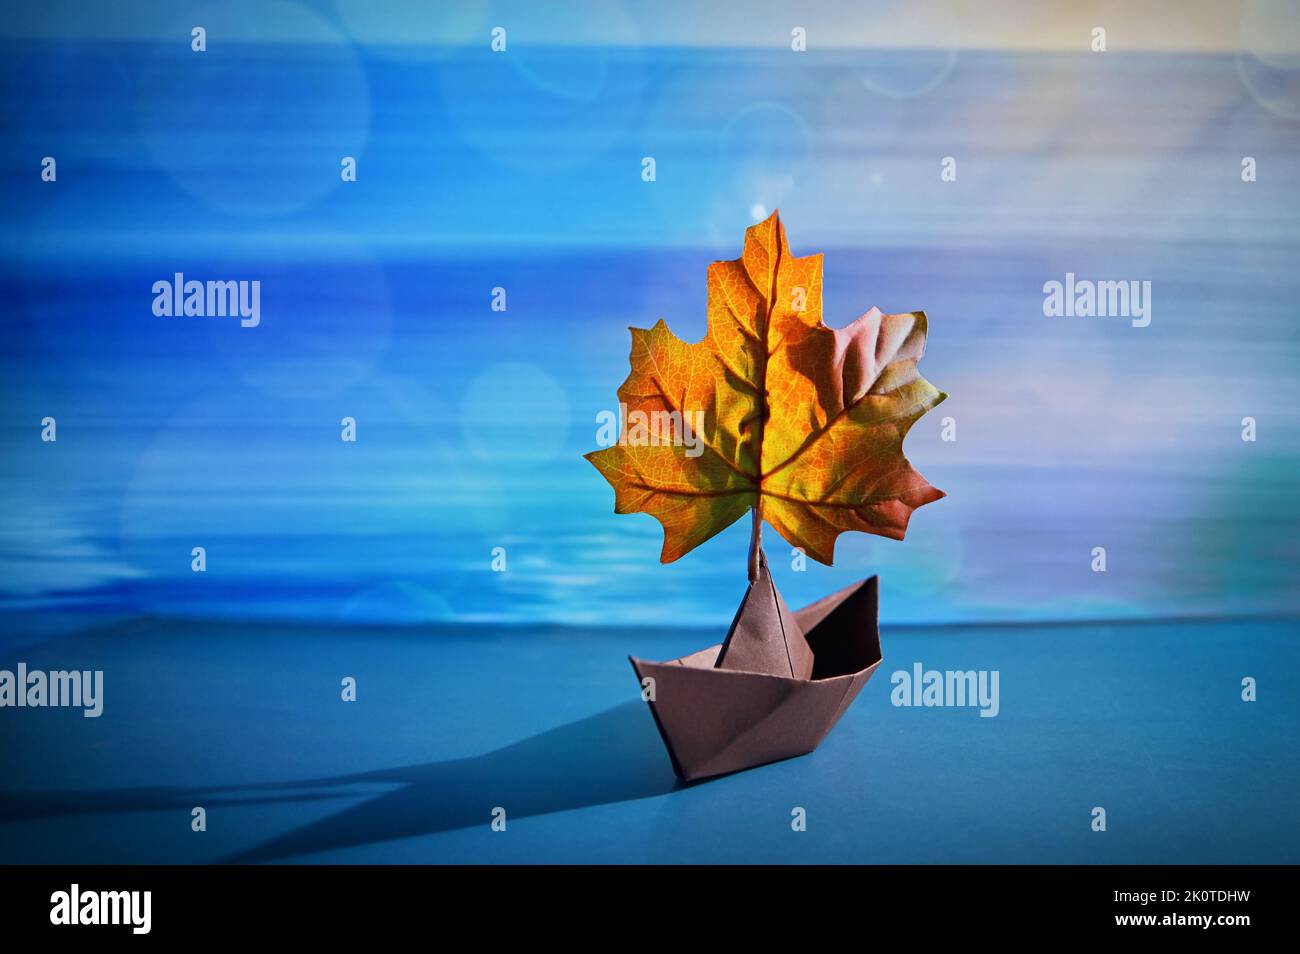 Abstract Paper Boat With A Maple Leaf On A Pond Stock Photo